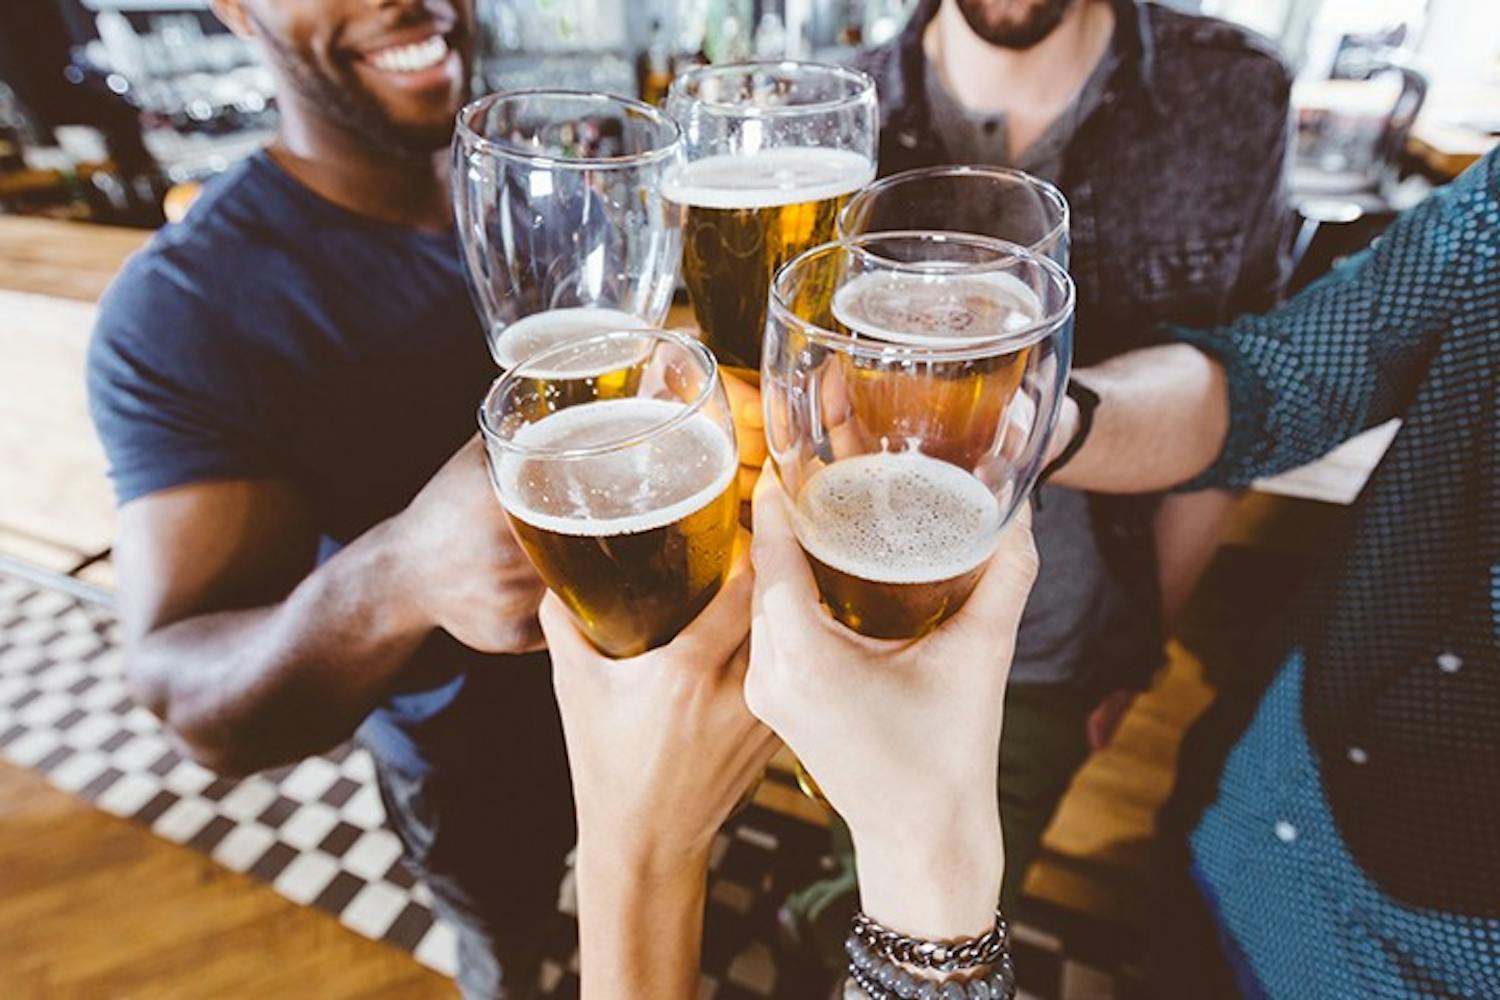  A group of people clink their glasses of beer together.